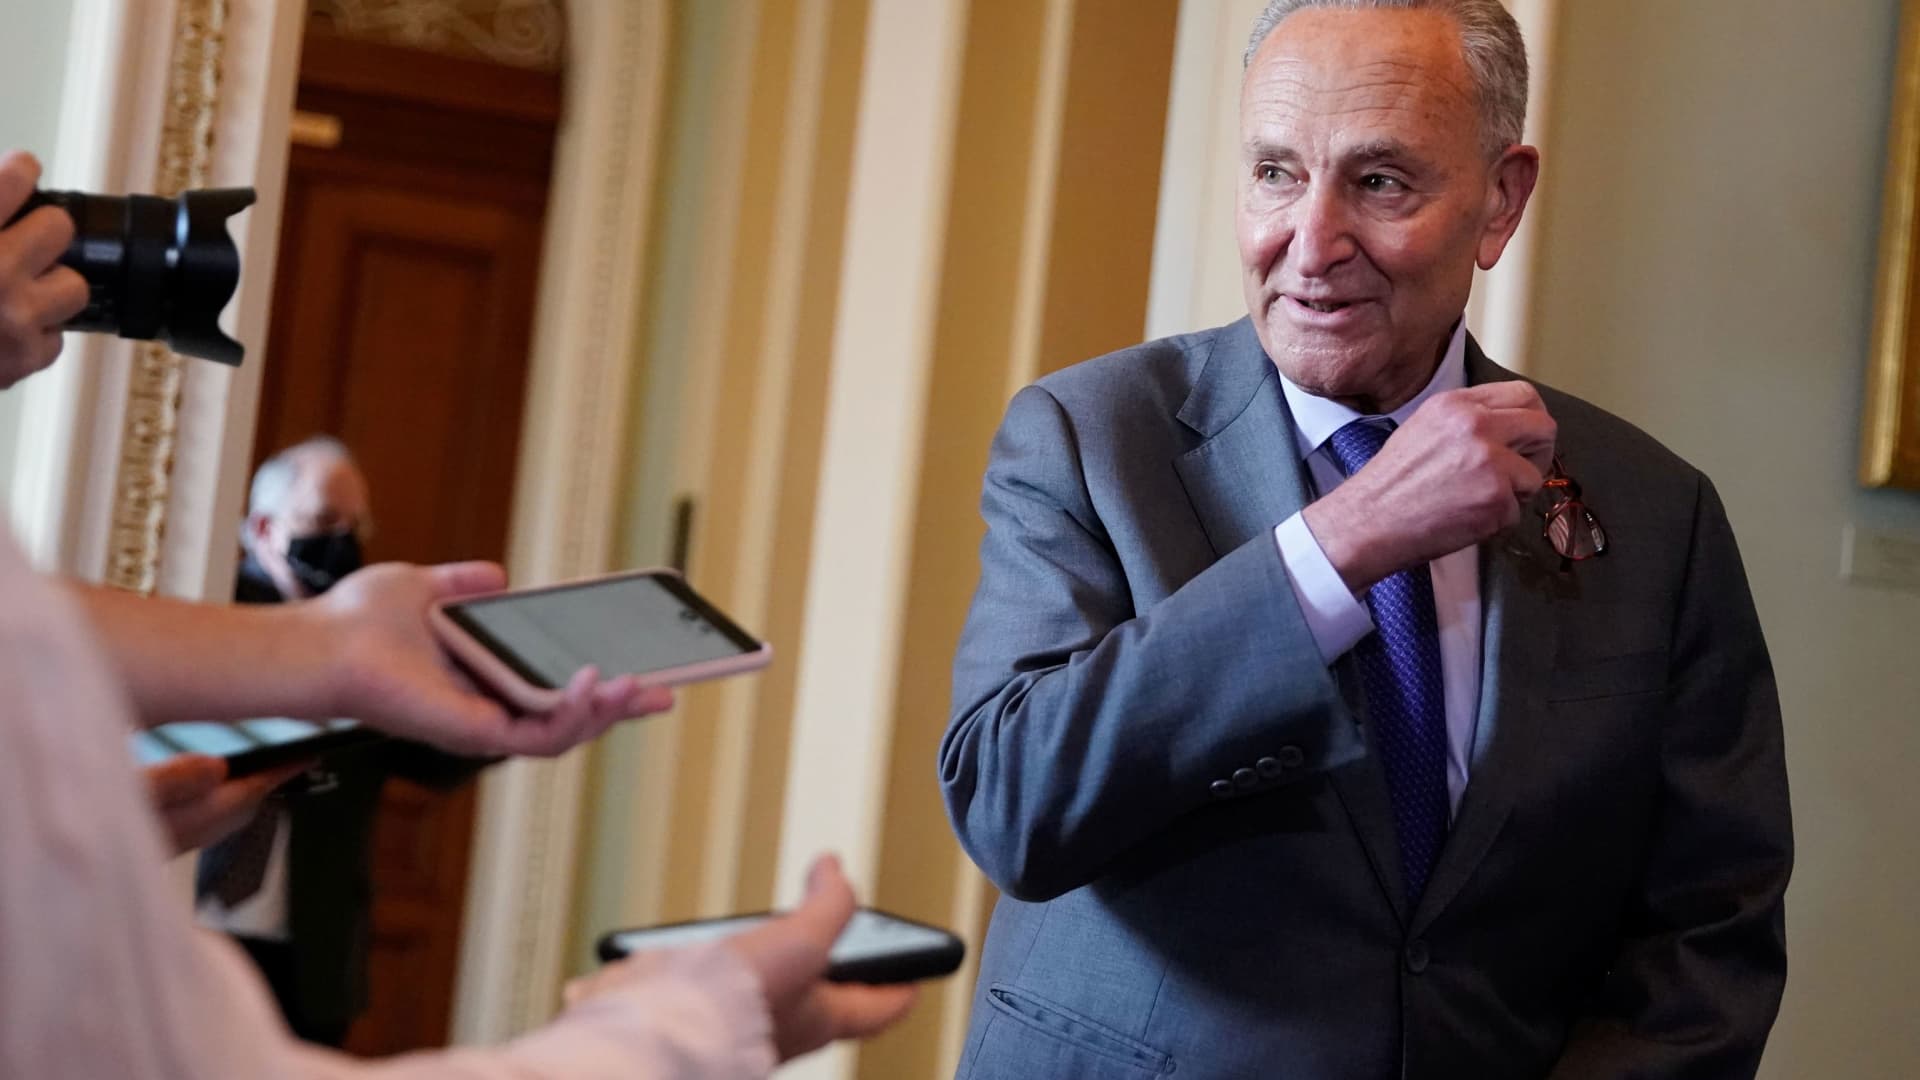 Senate Majority Leader Chuck Schumer (D-NY) speaks to reporters about the bipartisan infrastructure bill at the U.S. Capitol in Washington, July 28, 2021.